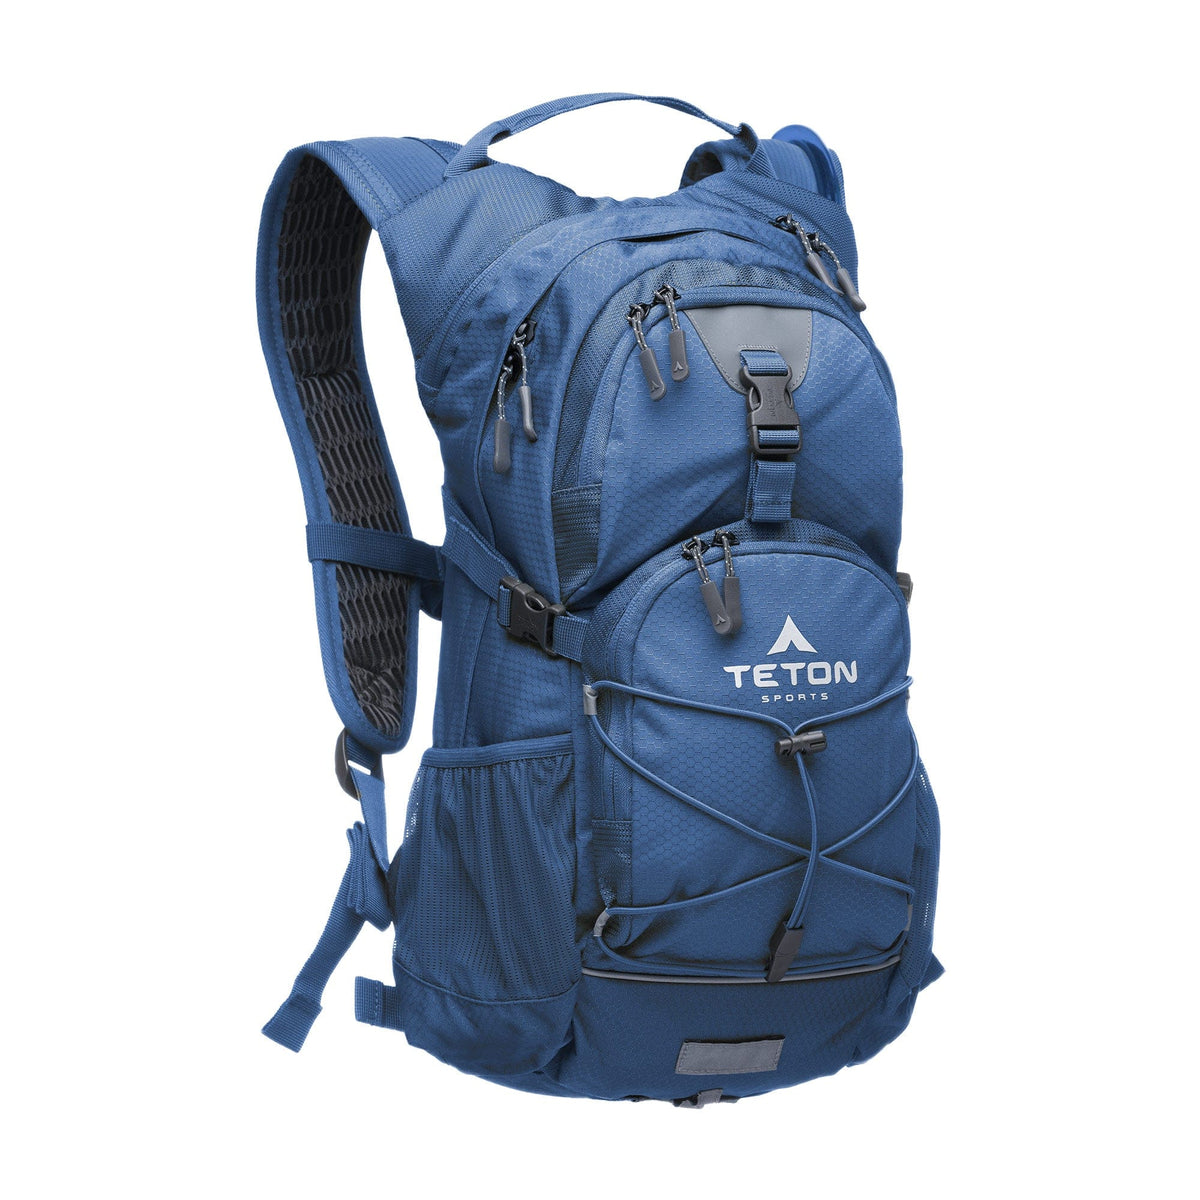 Buy Hiking & Camping Gear Online